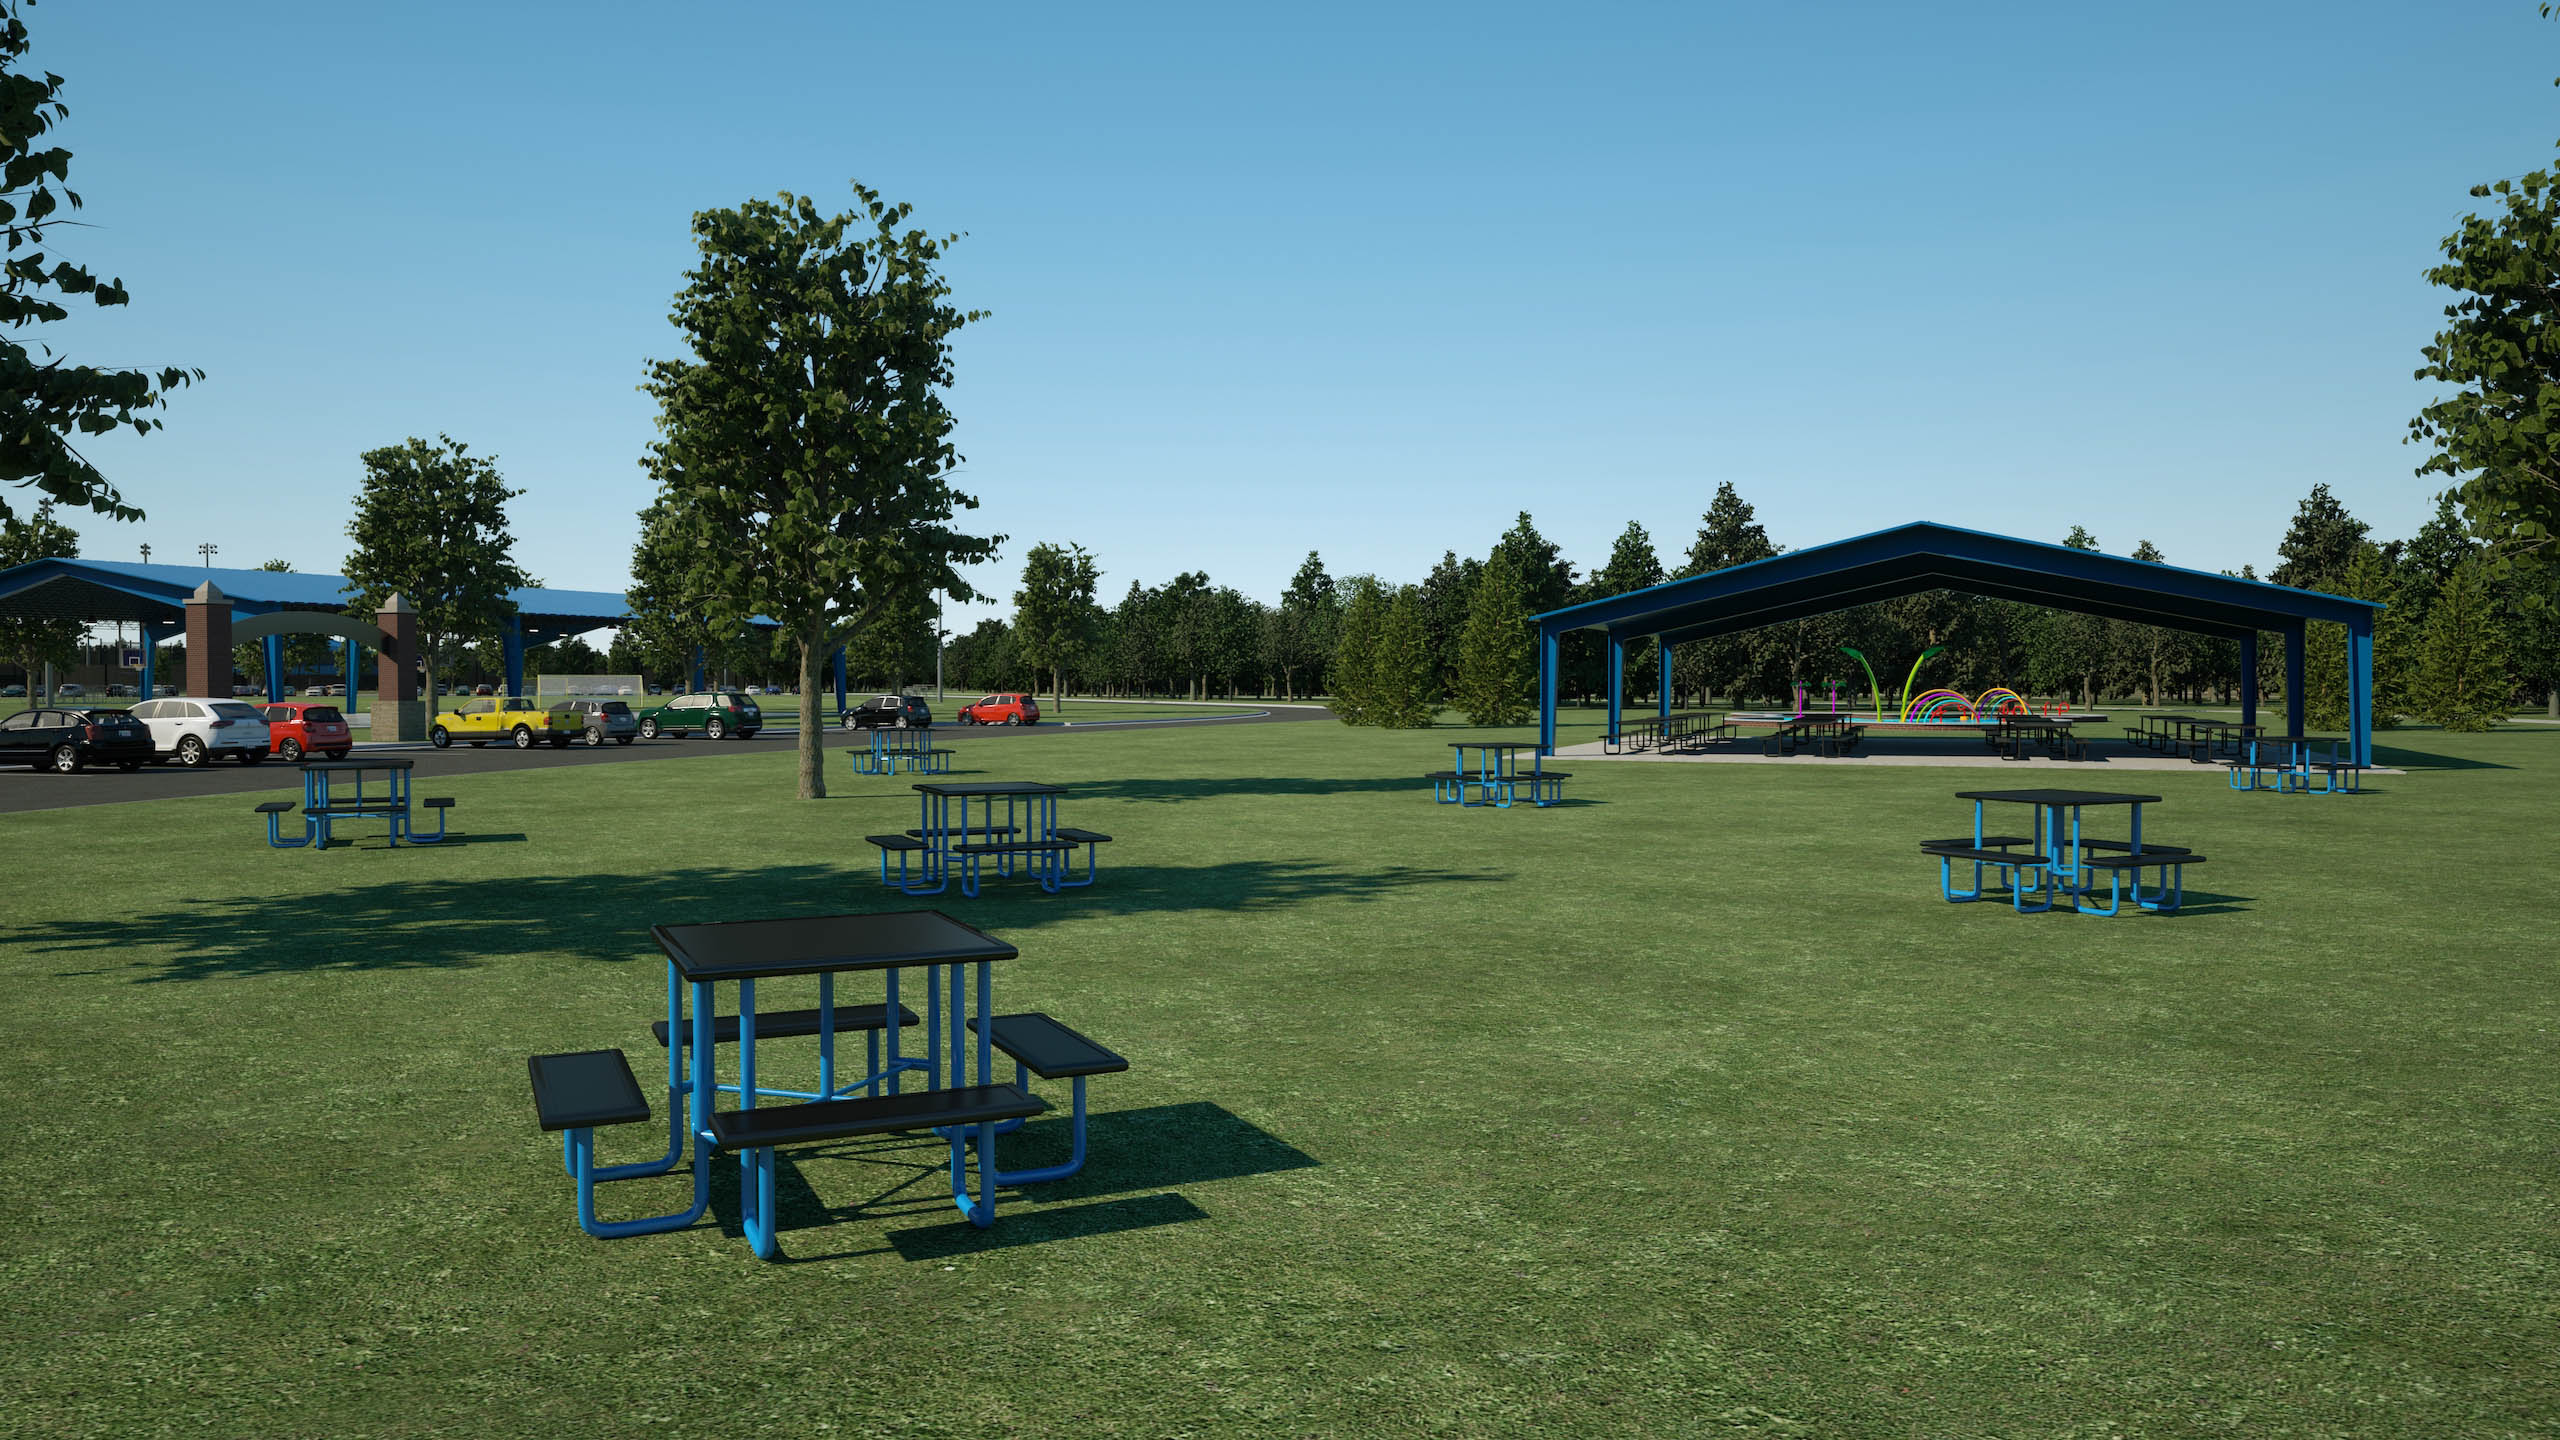 Picnic area at project site